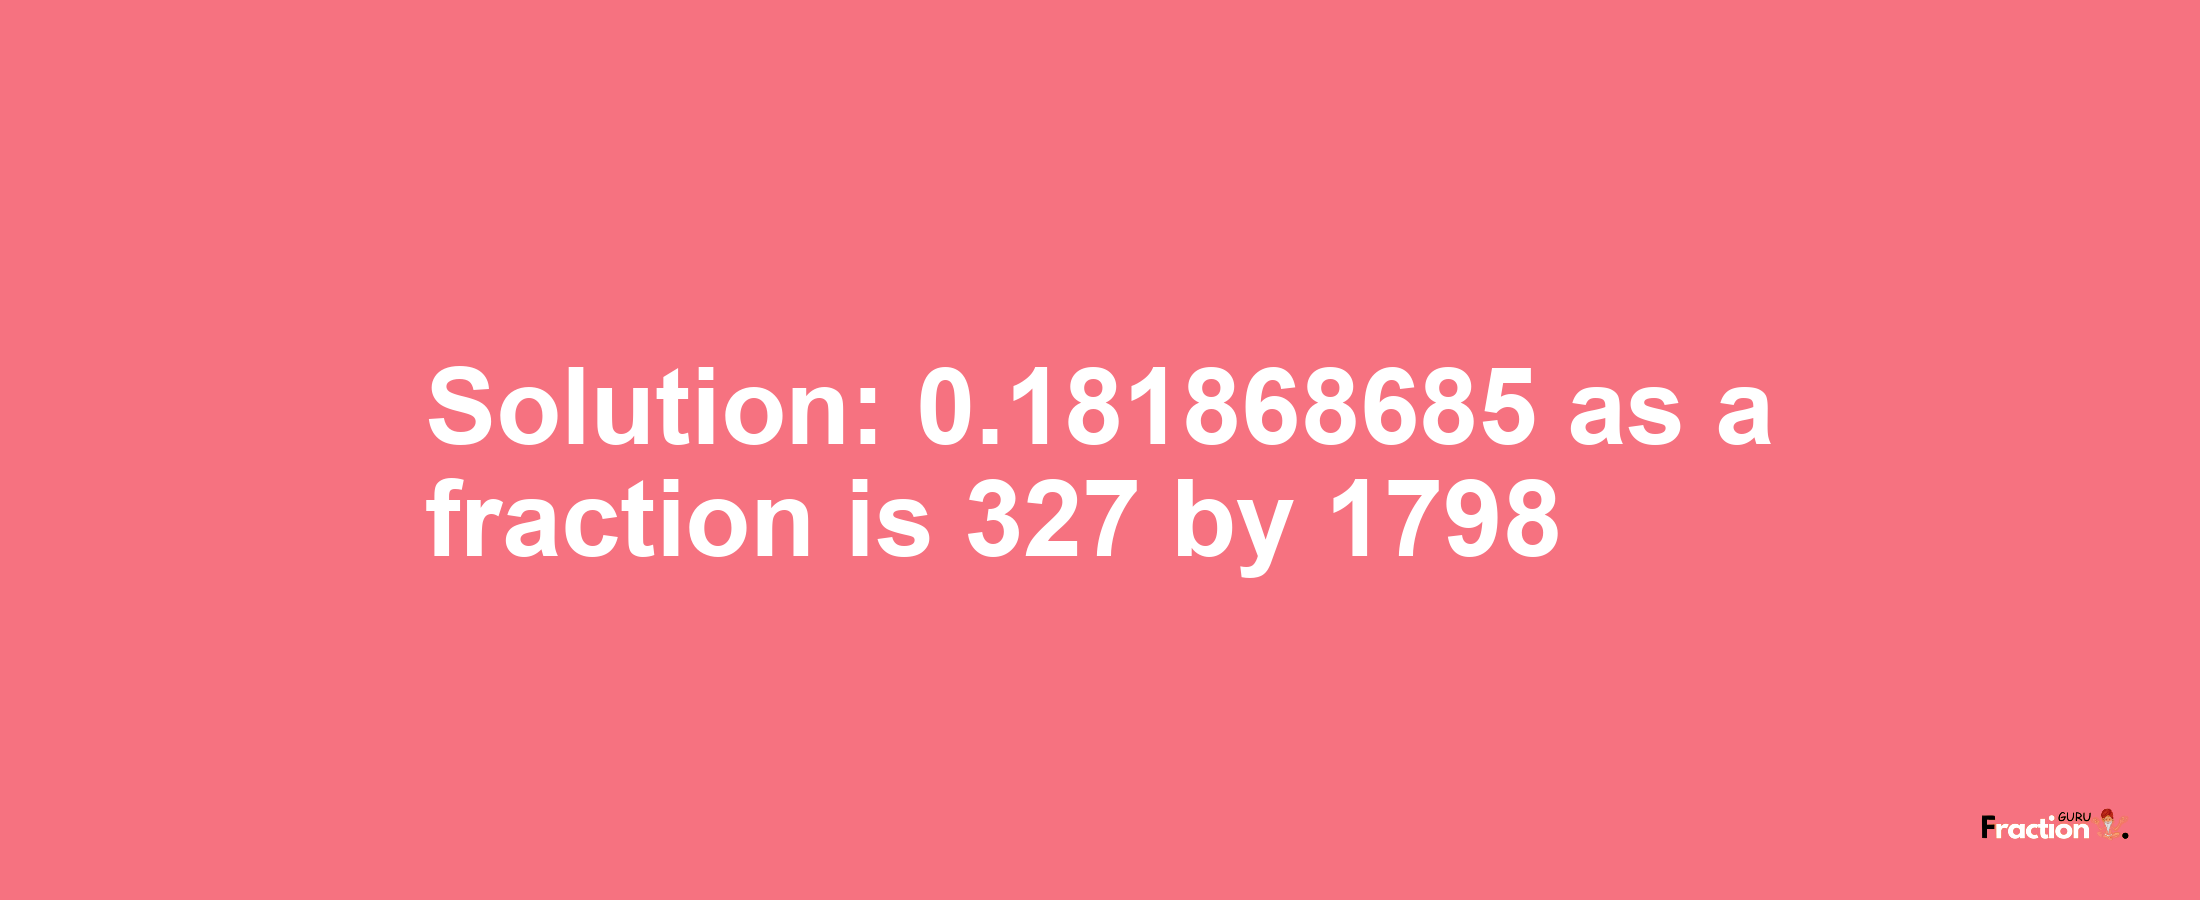 Solution:0.181868685 as a fraction is 327/1798